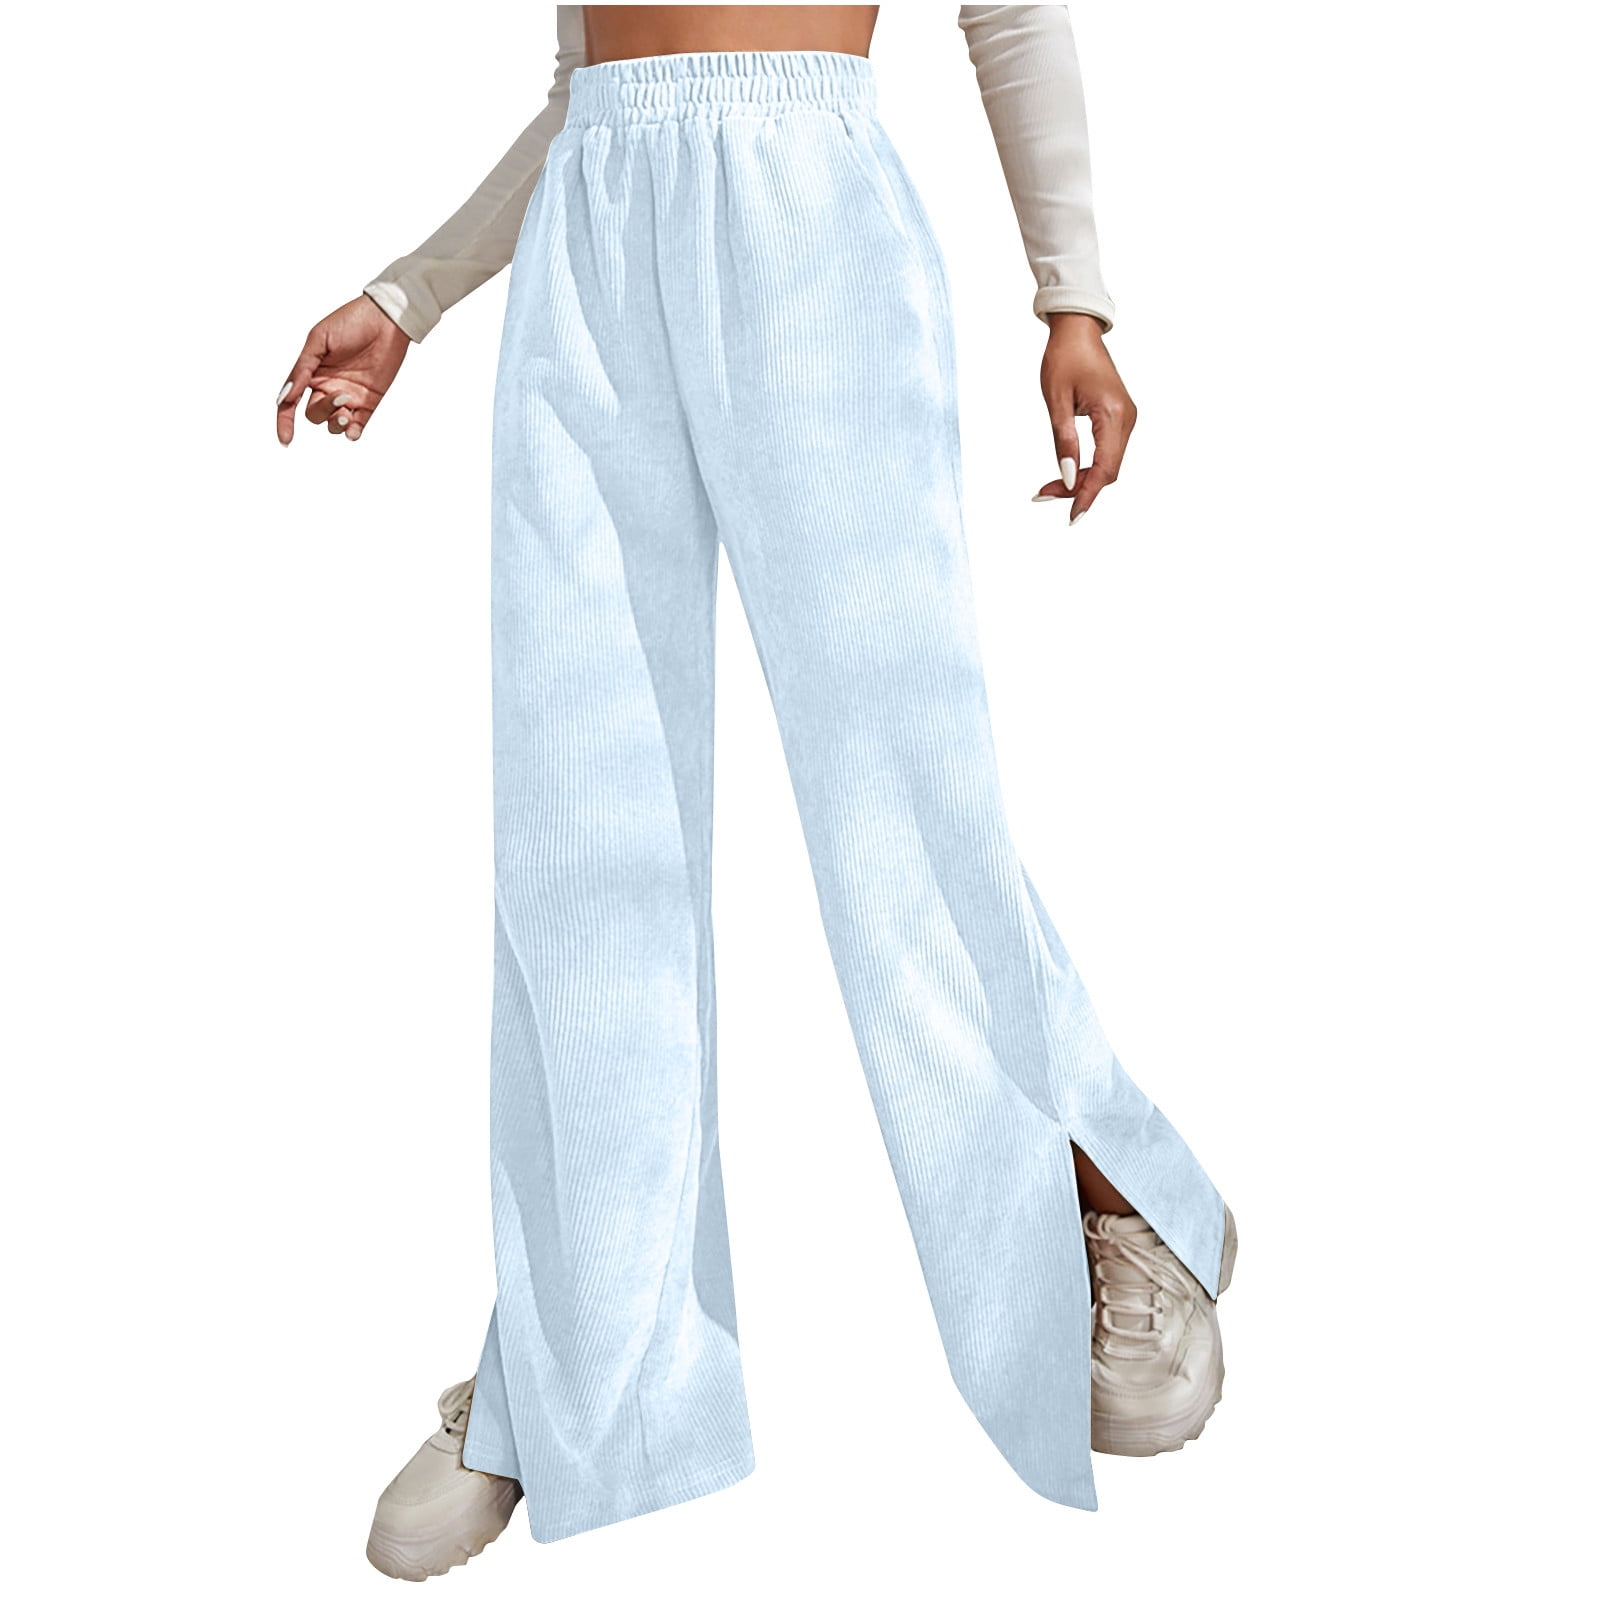 Zodggu Womens Bottoms Fashion Full Length Trousers Jeans Denim Pants for  Girls Comfy Lounge Casual Pants Solid Color for Women 2023 White 10 